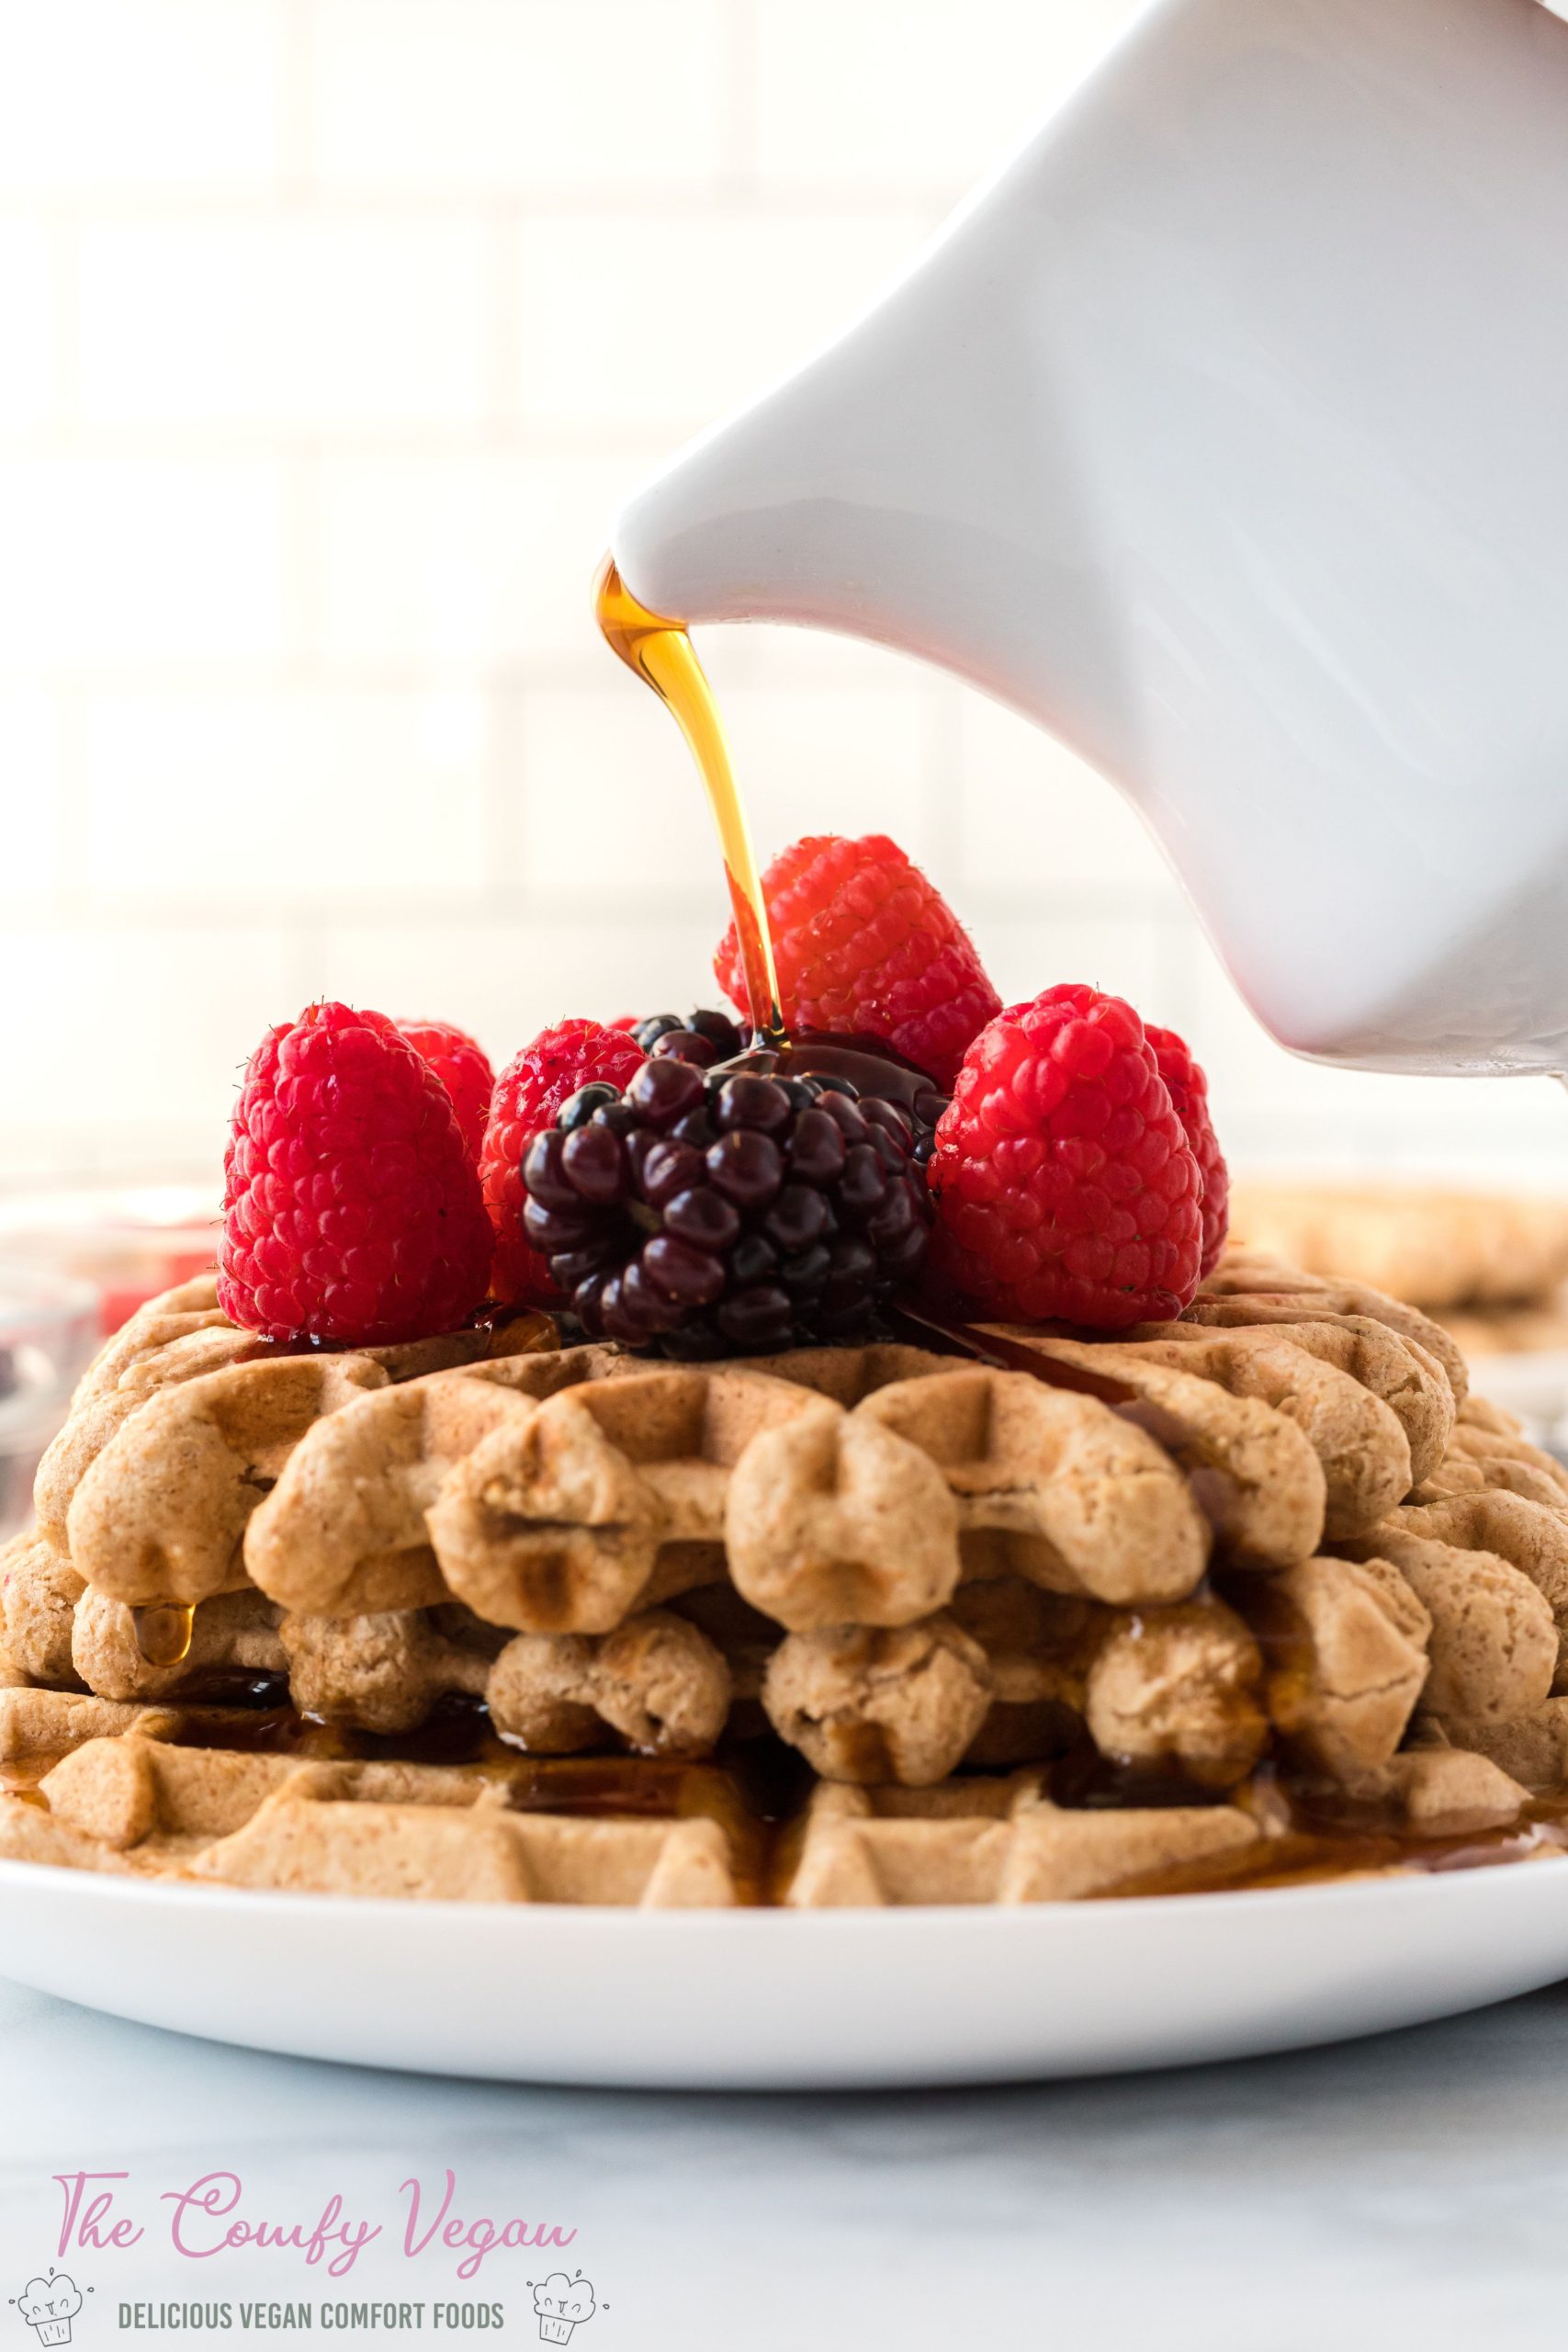 Easy Vegan Waffles! This vegan waffles recipe is so quick and easy to make. Filled with whole wheat flour, oats, and almond flour these waffles are hearty and taste amazing. Ready to enjoy in less than 15 minutes.